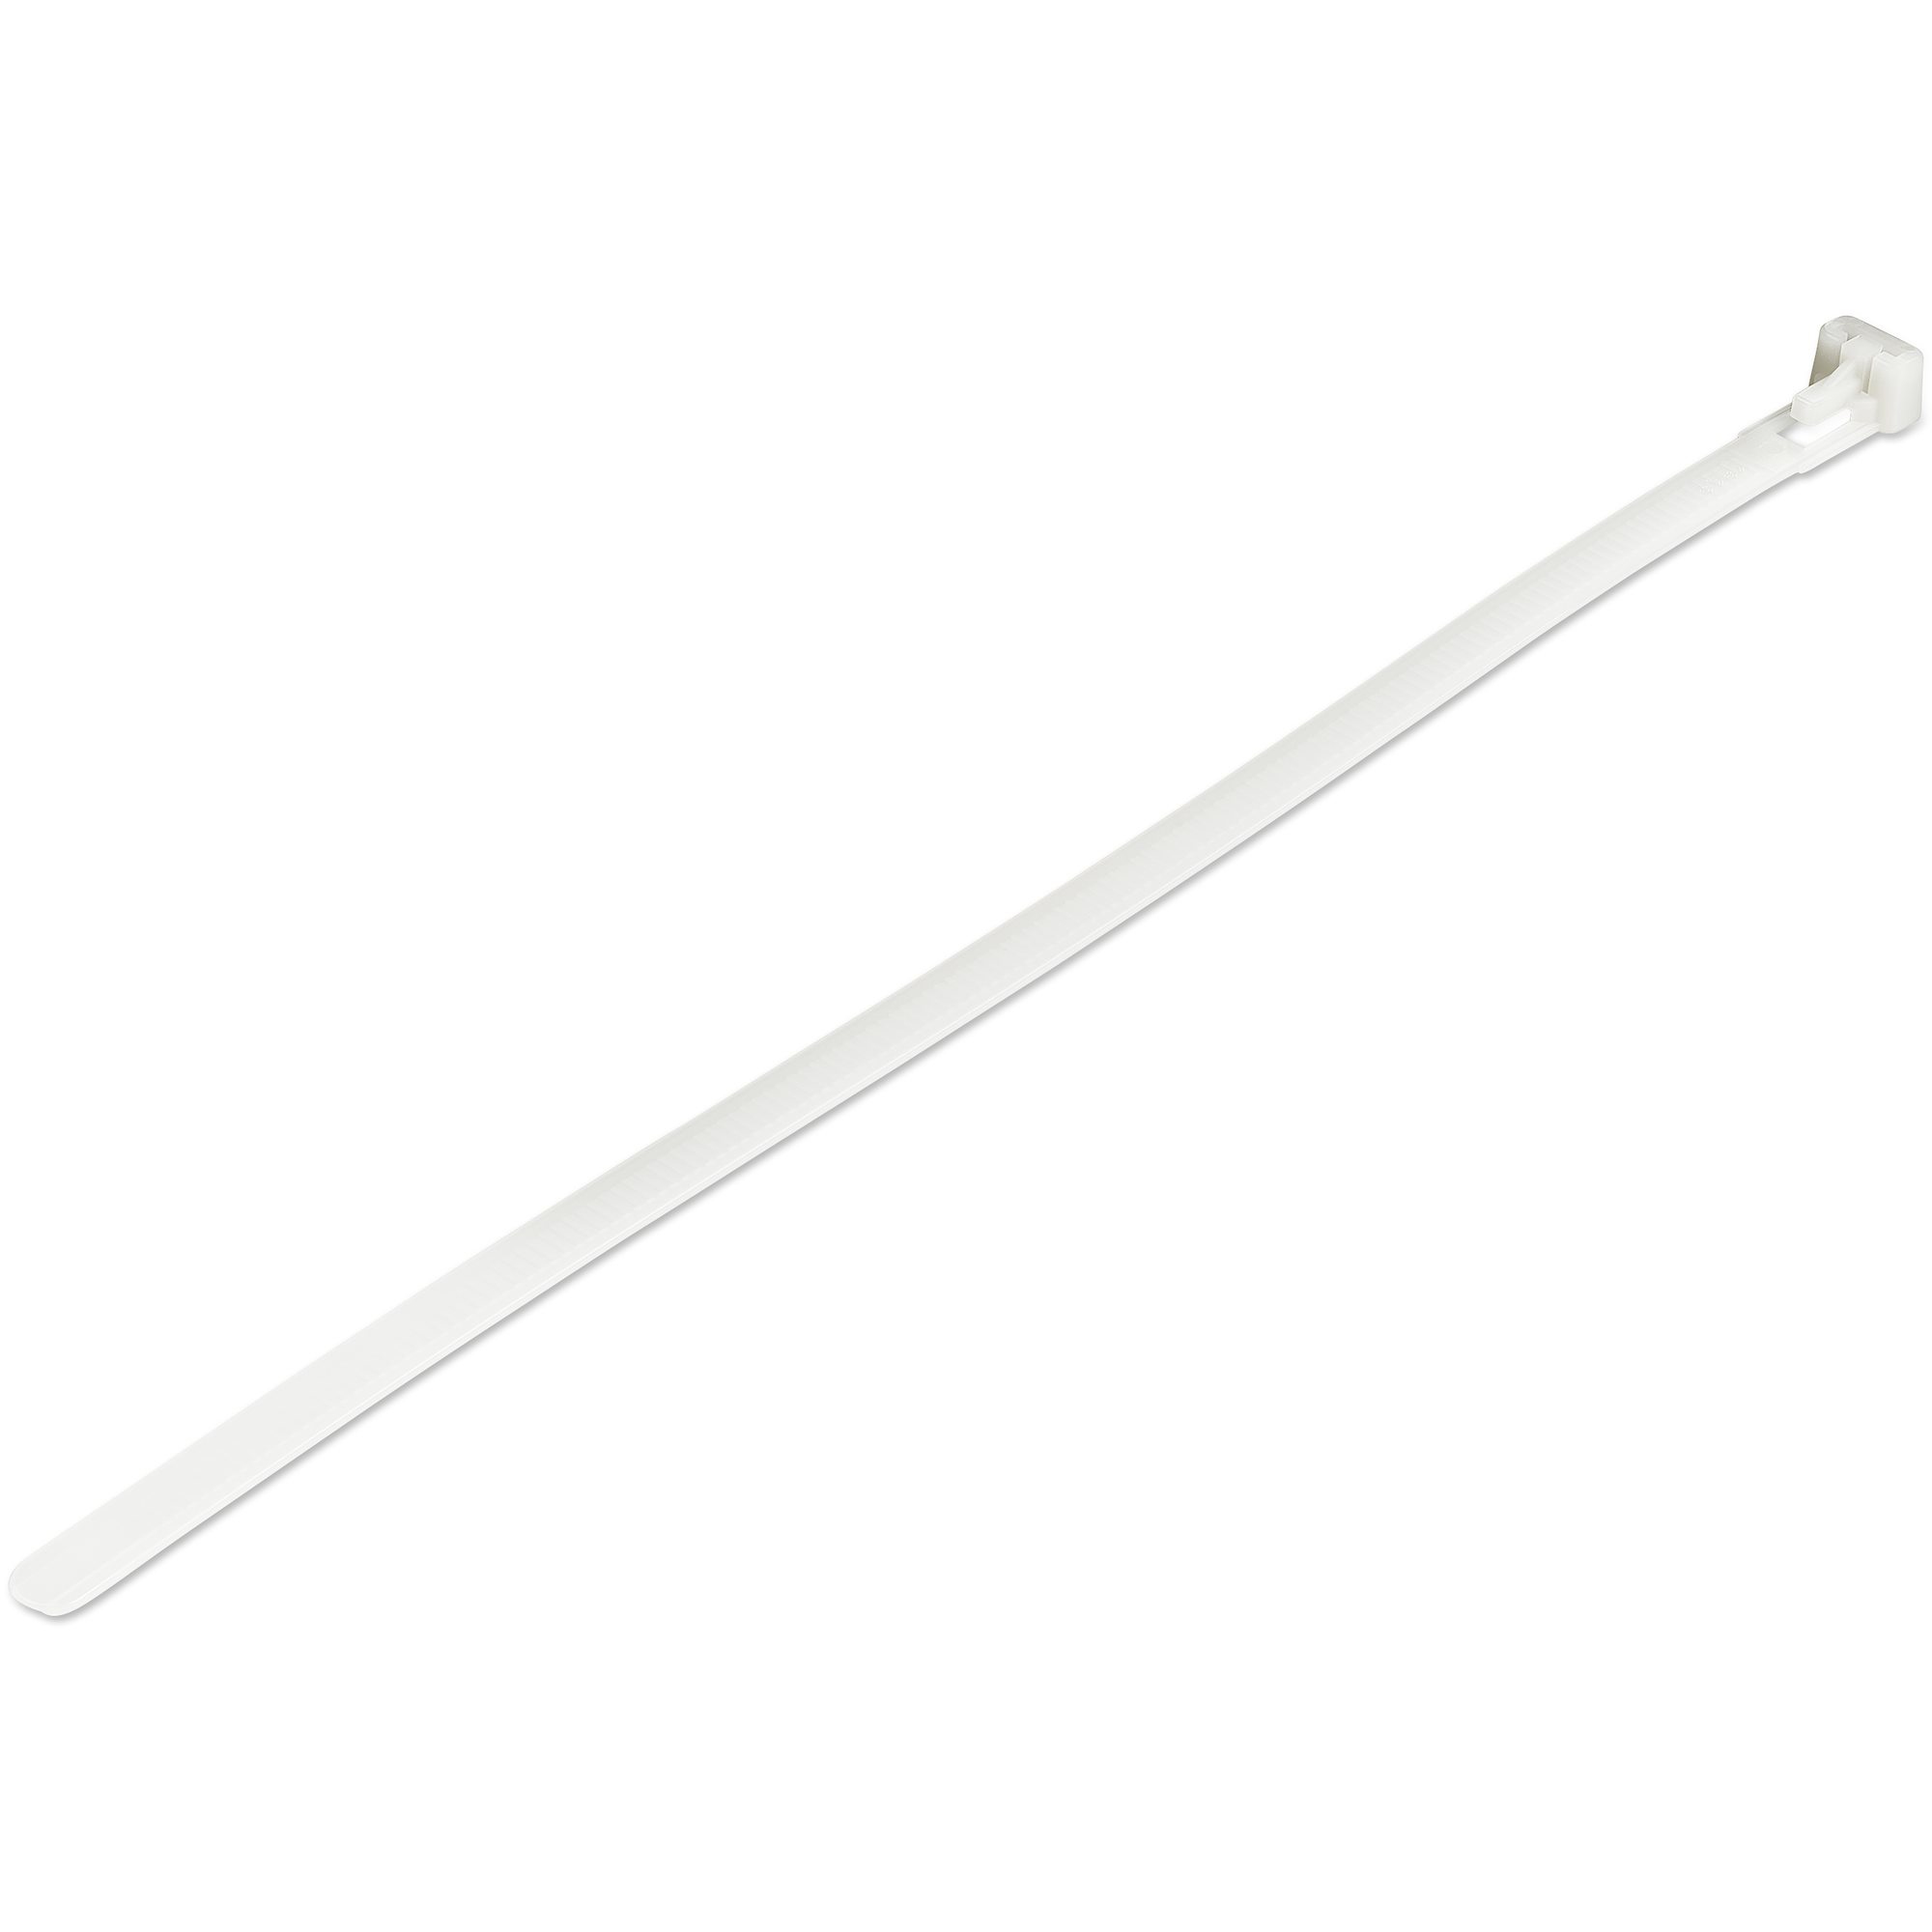 StarTech.com 10"(25cm) Reusable Cable Ties, 1/4"(7mm) wide, 2-1/2"(65mm) Bundle Dia. 50lb(22kg) Tensile Strength, Releasable Nylon Ties, Indoor/Outdoor, 94V-2/UL Listed, 100 Pack, White - Nylon 66 Plastic - TAA (CBMZTRB10)